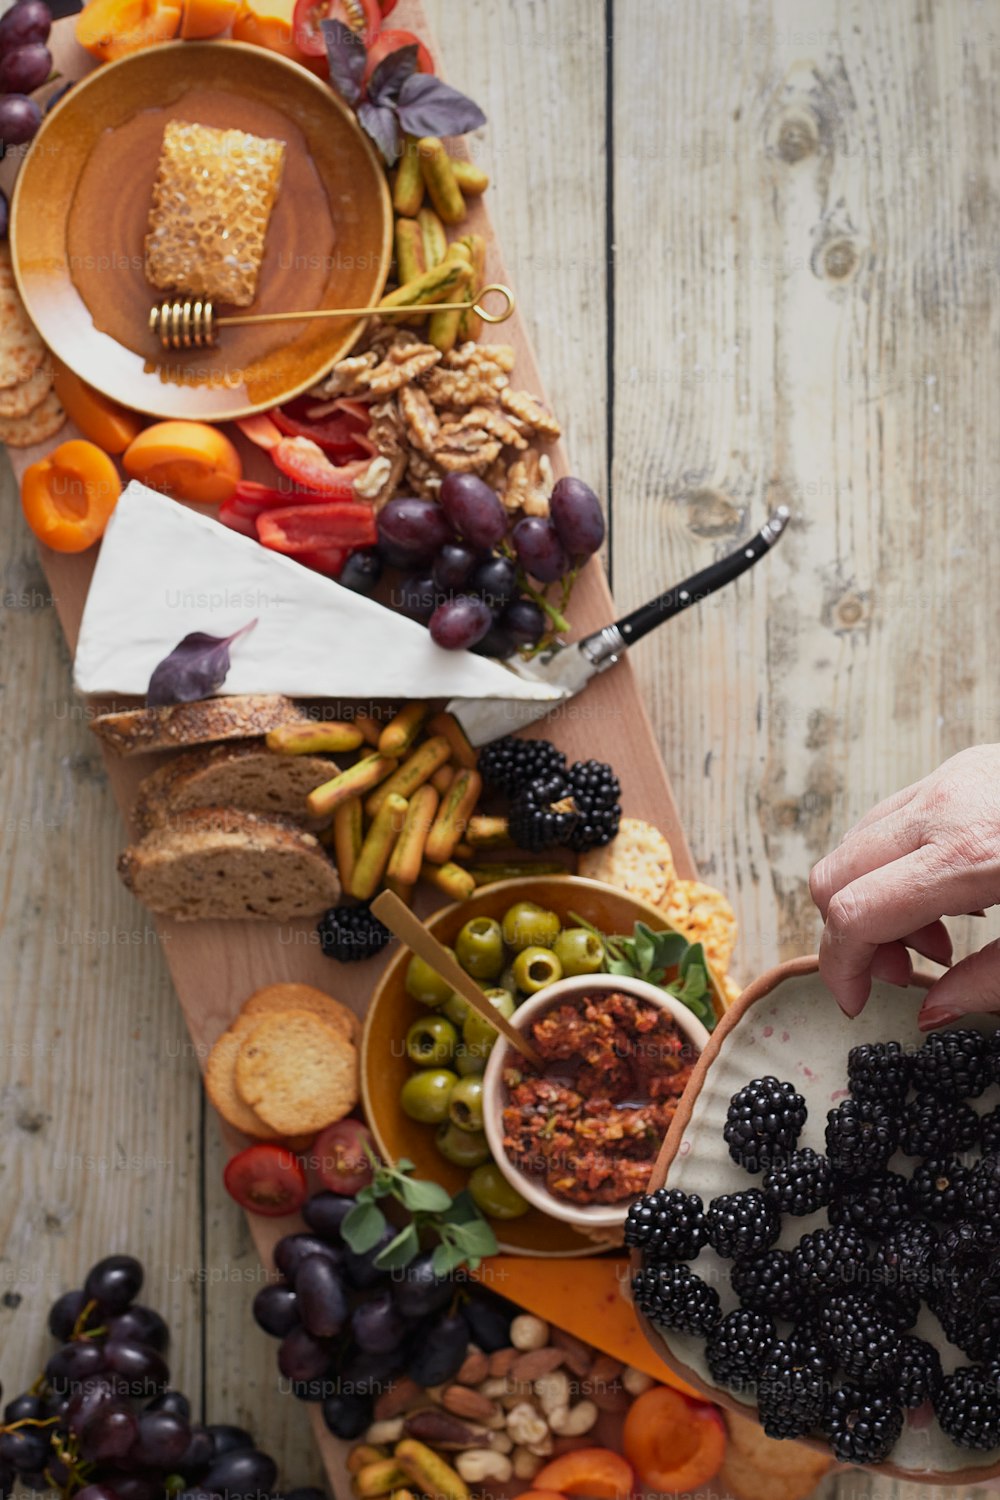 a platter of fruit, bread, and crackers on a wooden table